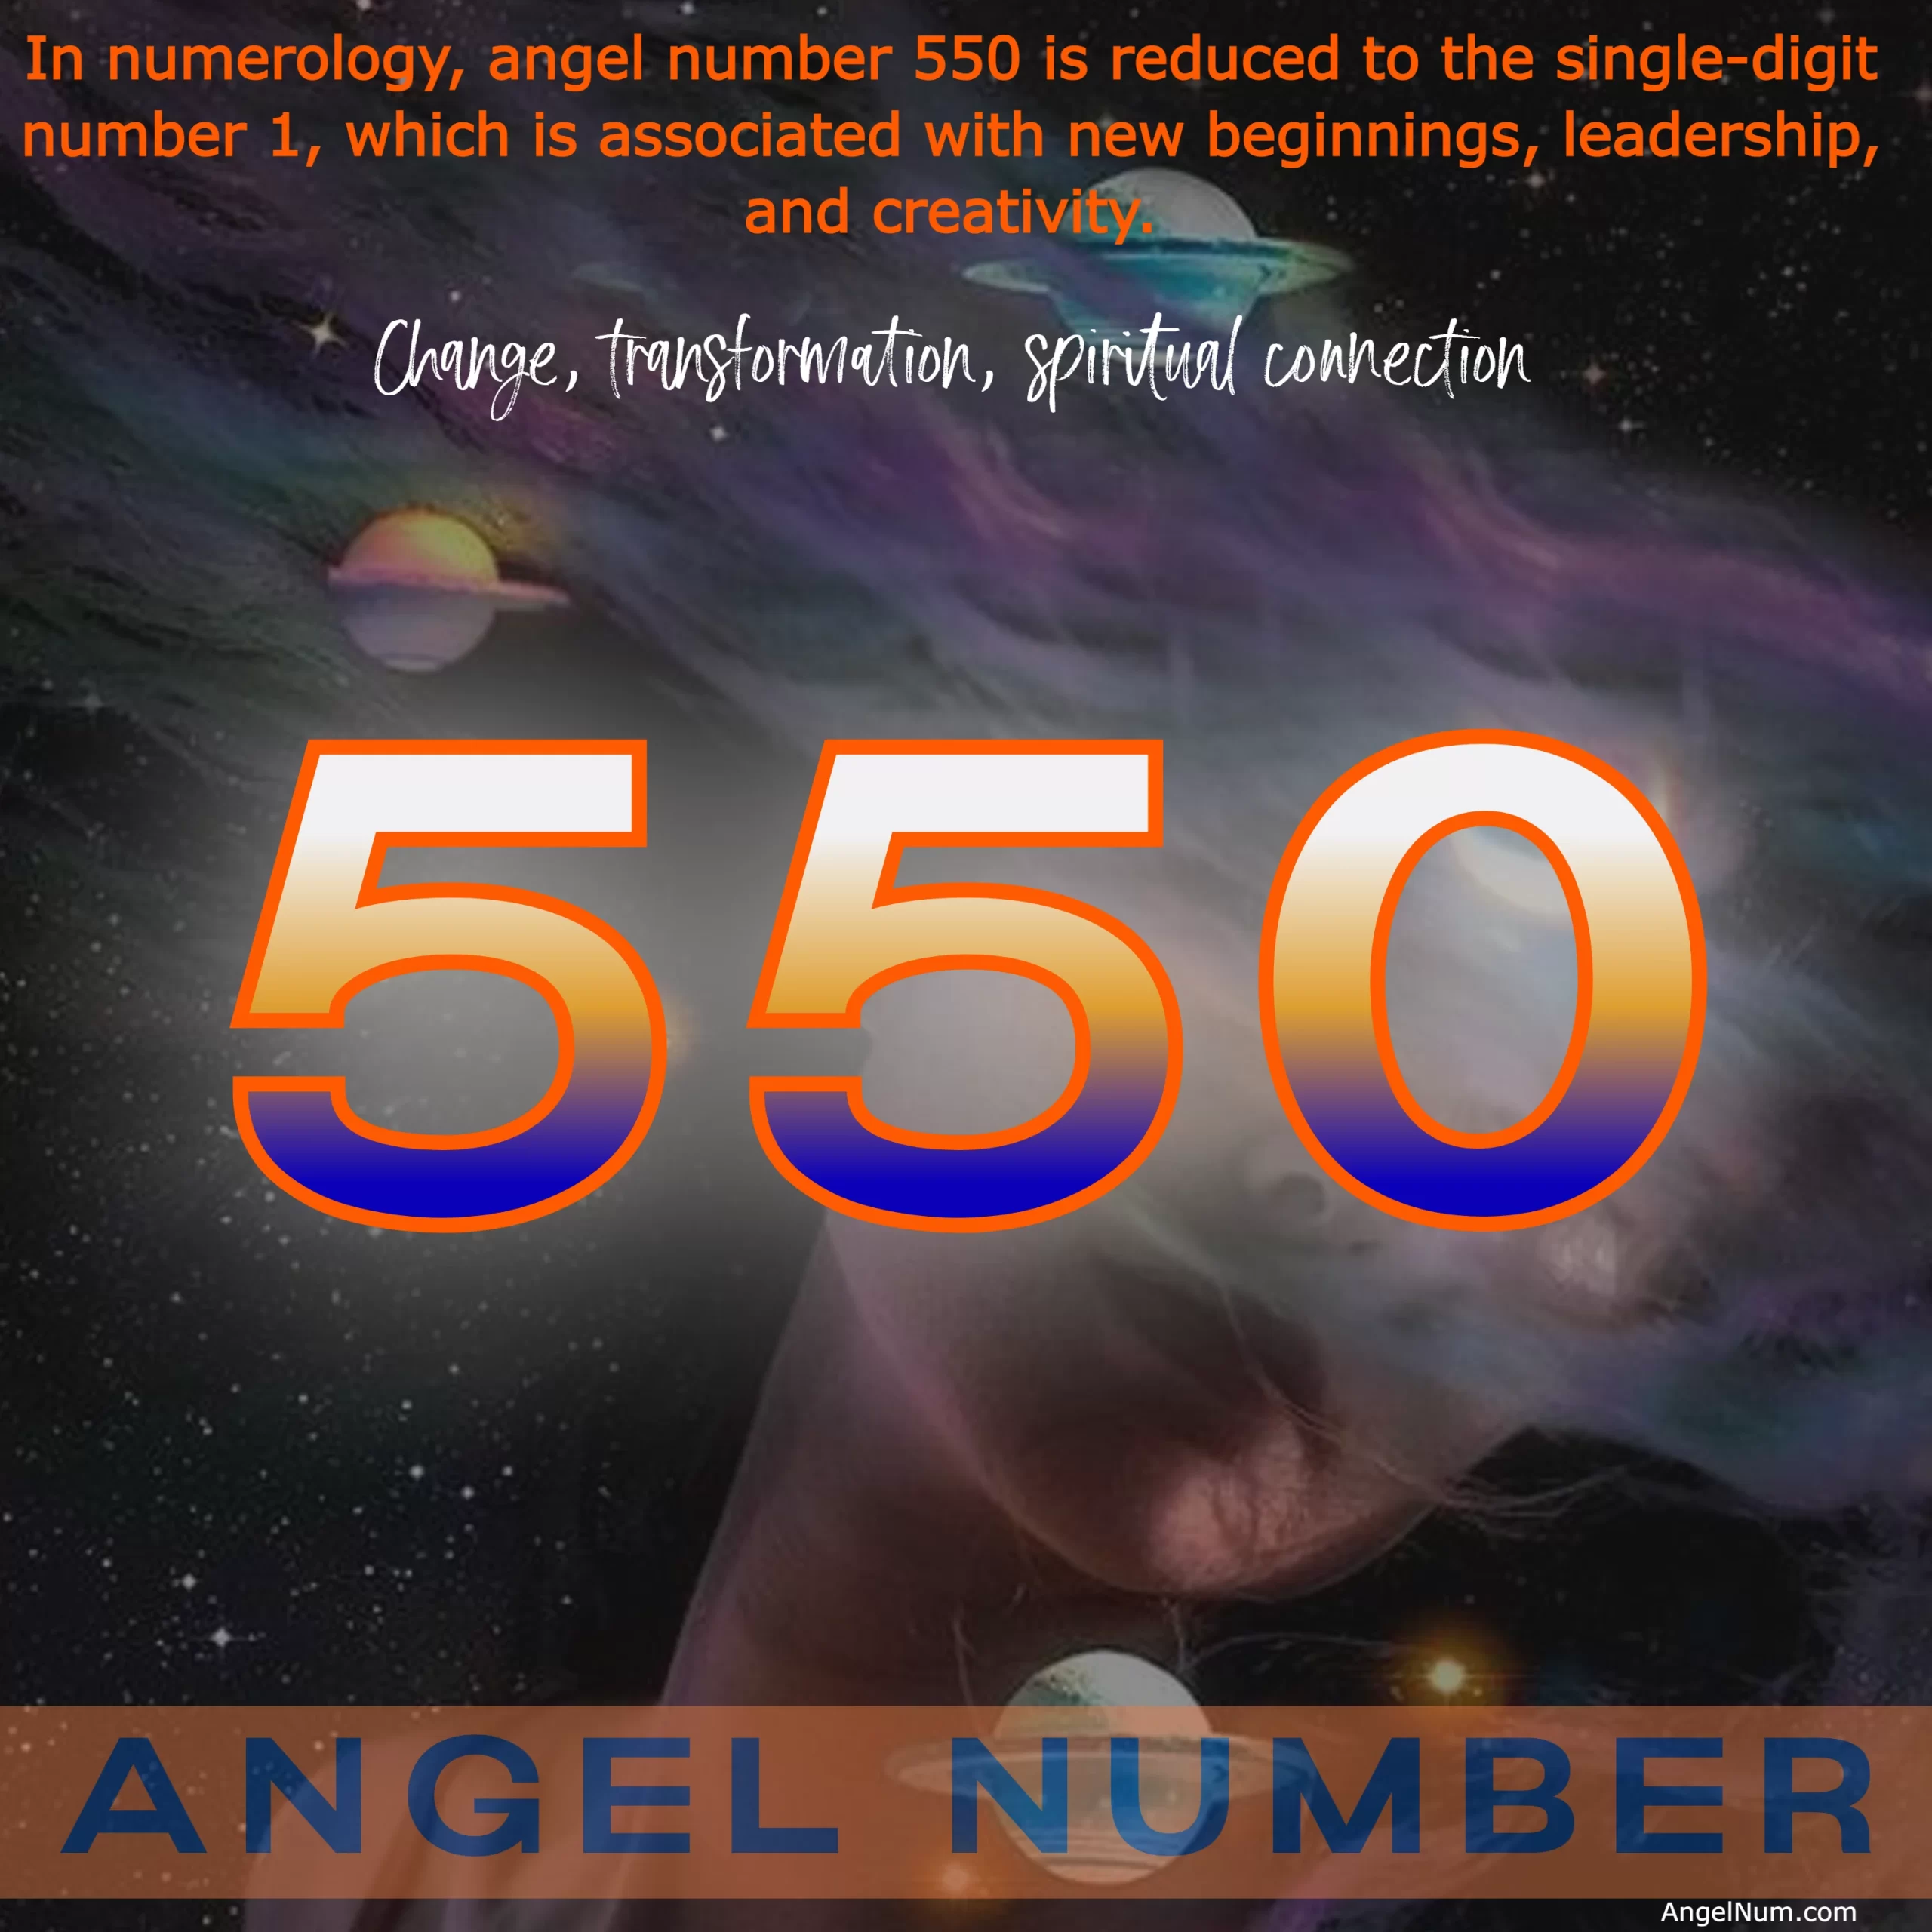 Unlocking Change and Spiritual Connection: The Meaning of Angel Number 550